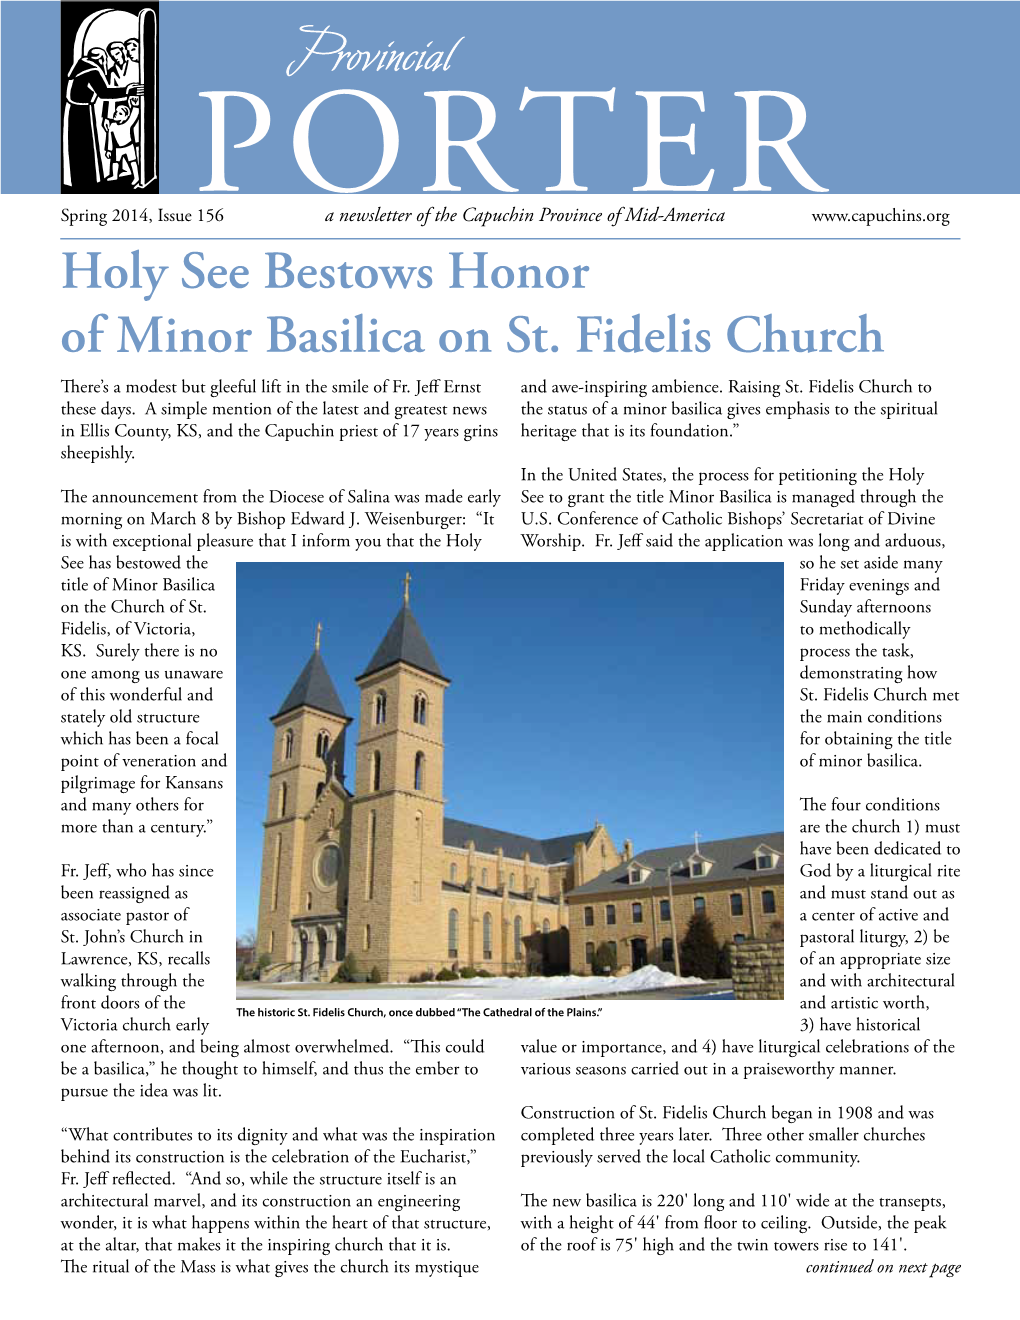 Holy See Bestows Honor of Minor Basilica on St. Fidelis Church There’S a Modest but Gleeful Lift in the Smile of Fr